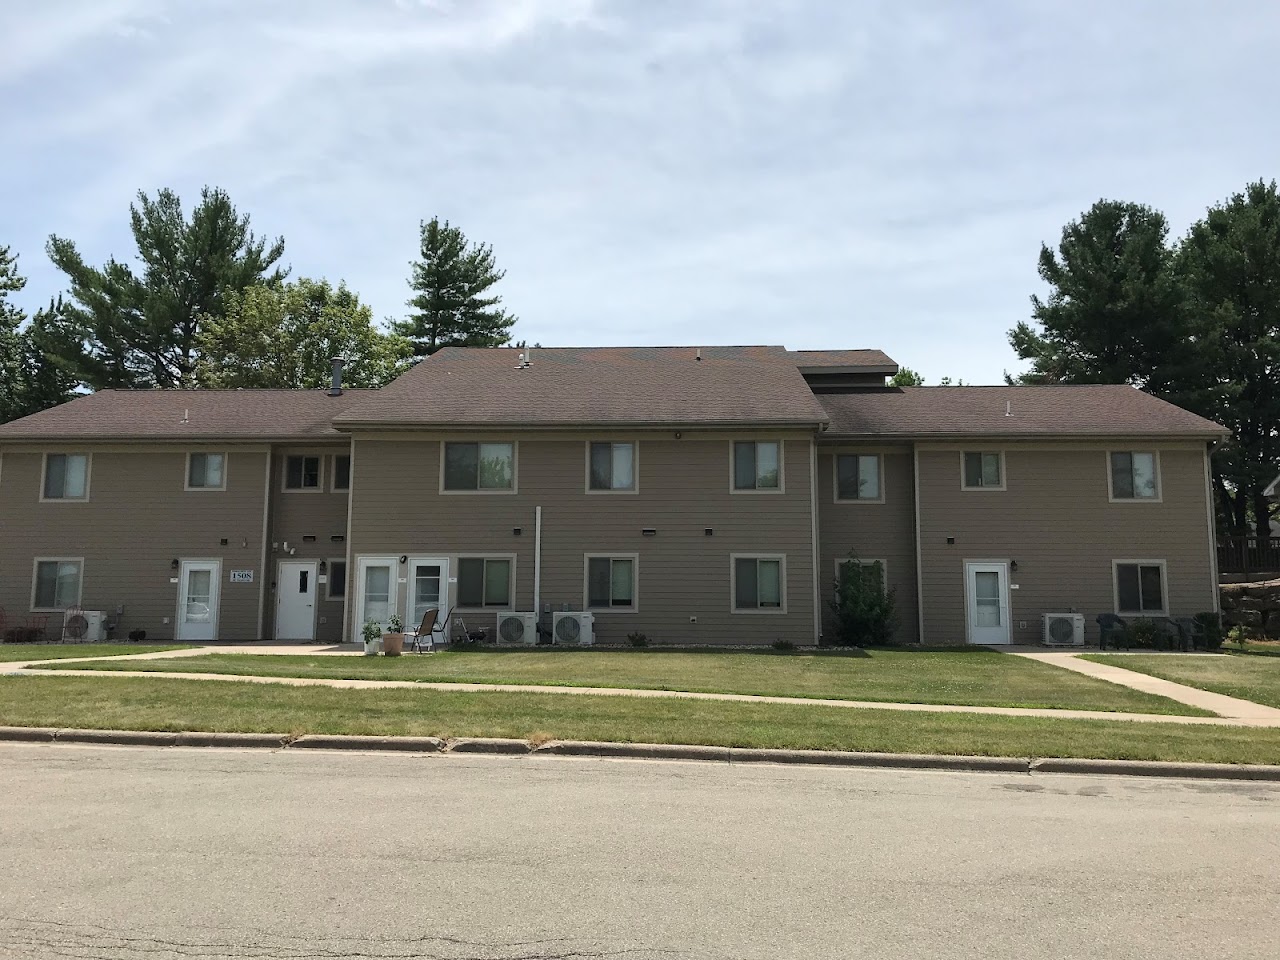 Photo of PARVIEW APTS. Affordable housing located at 1516 DE VALERA DR PLATTEVILLE, WI 53818